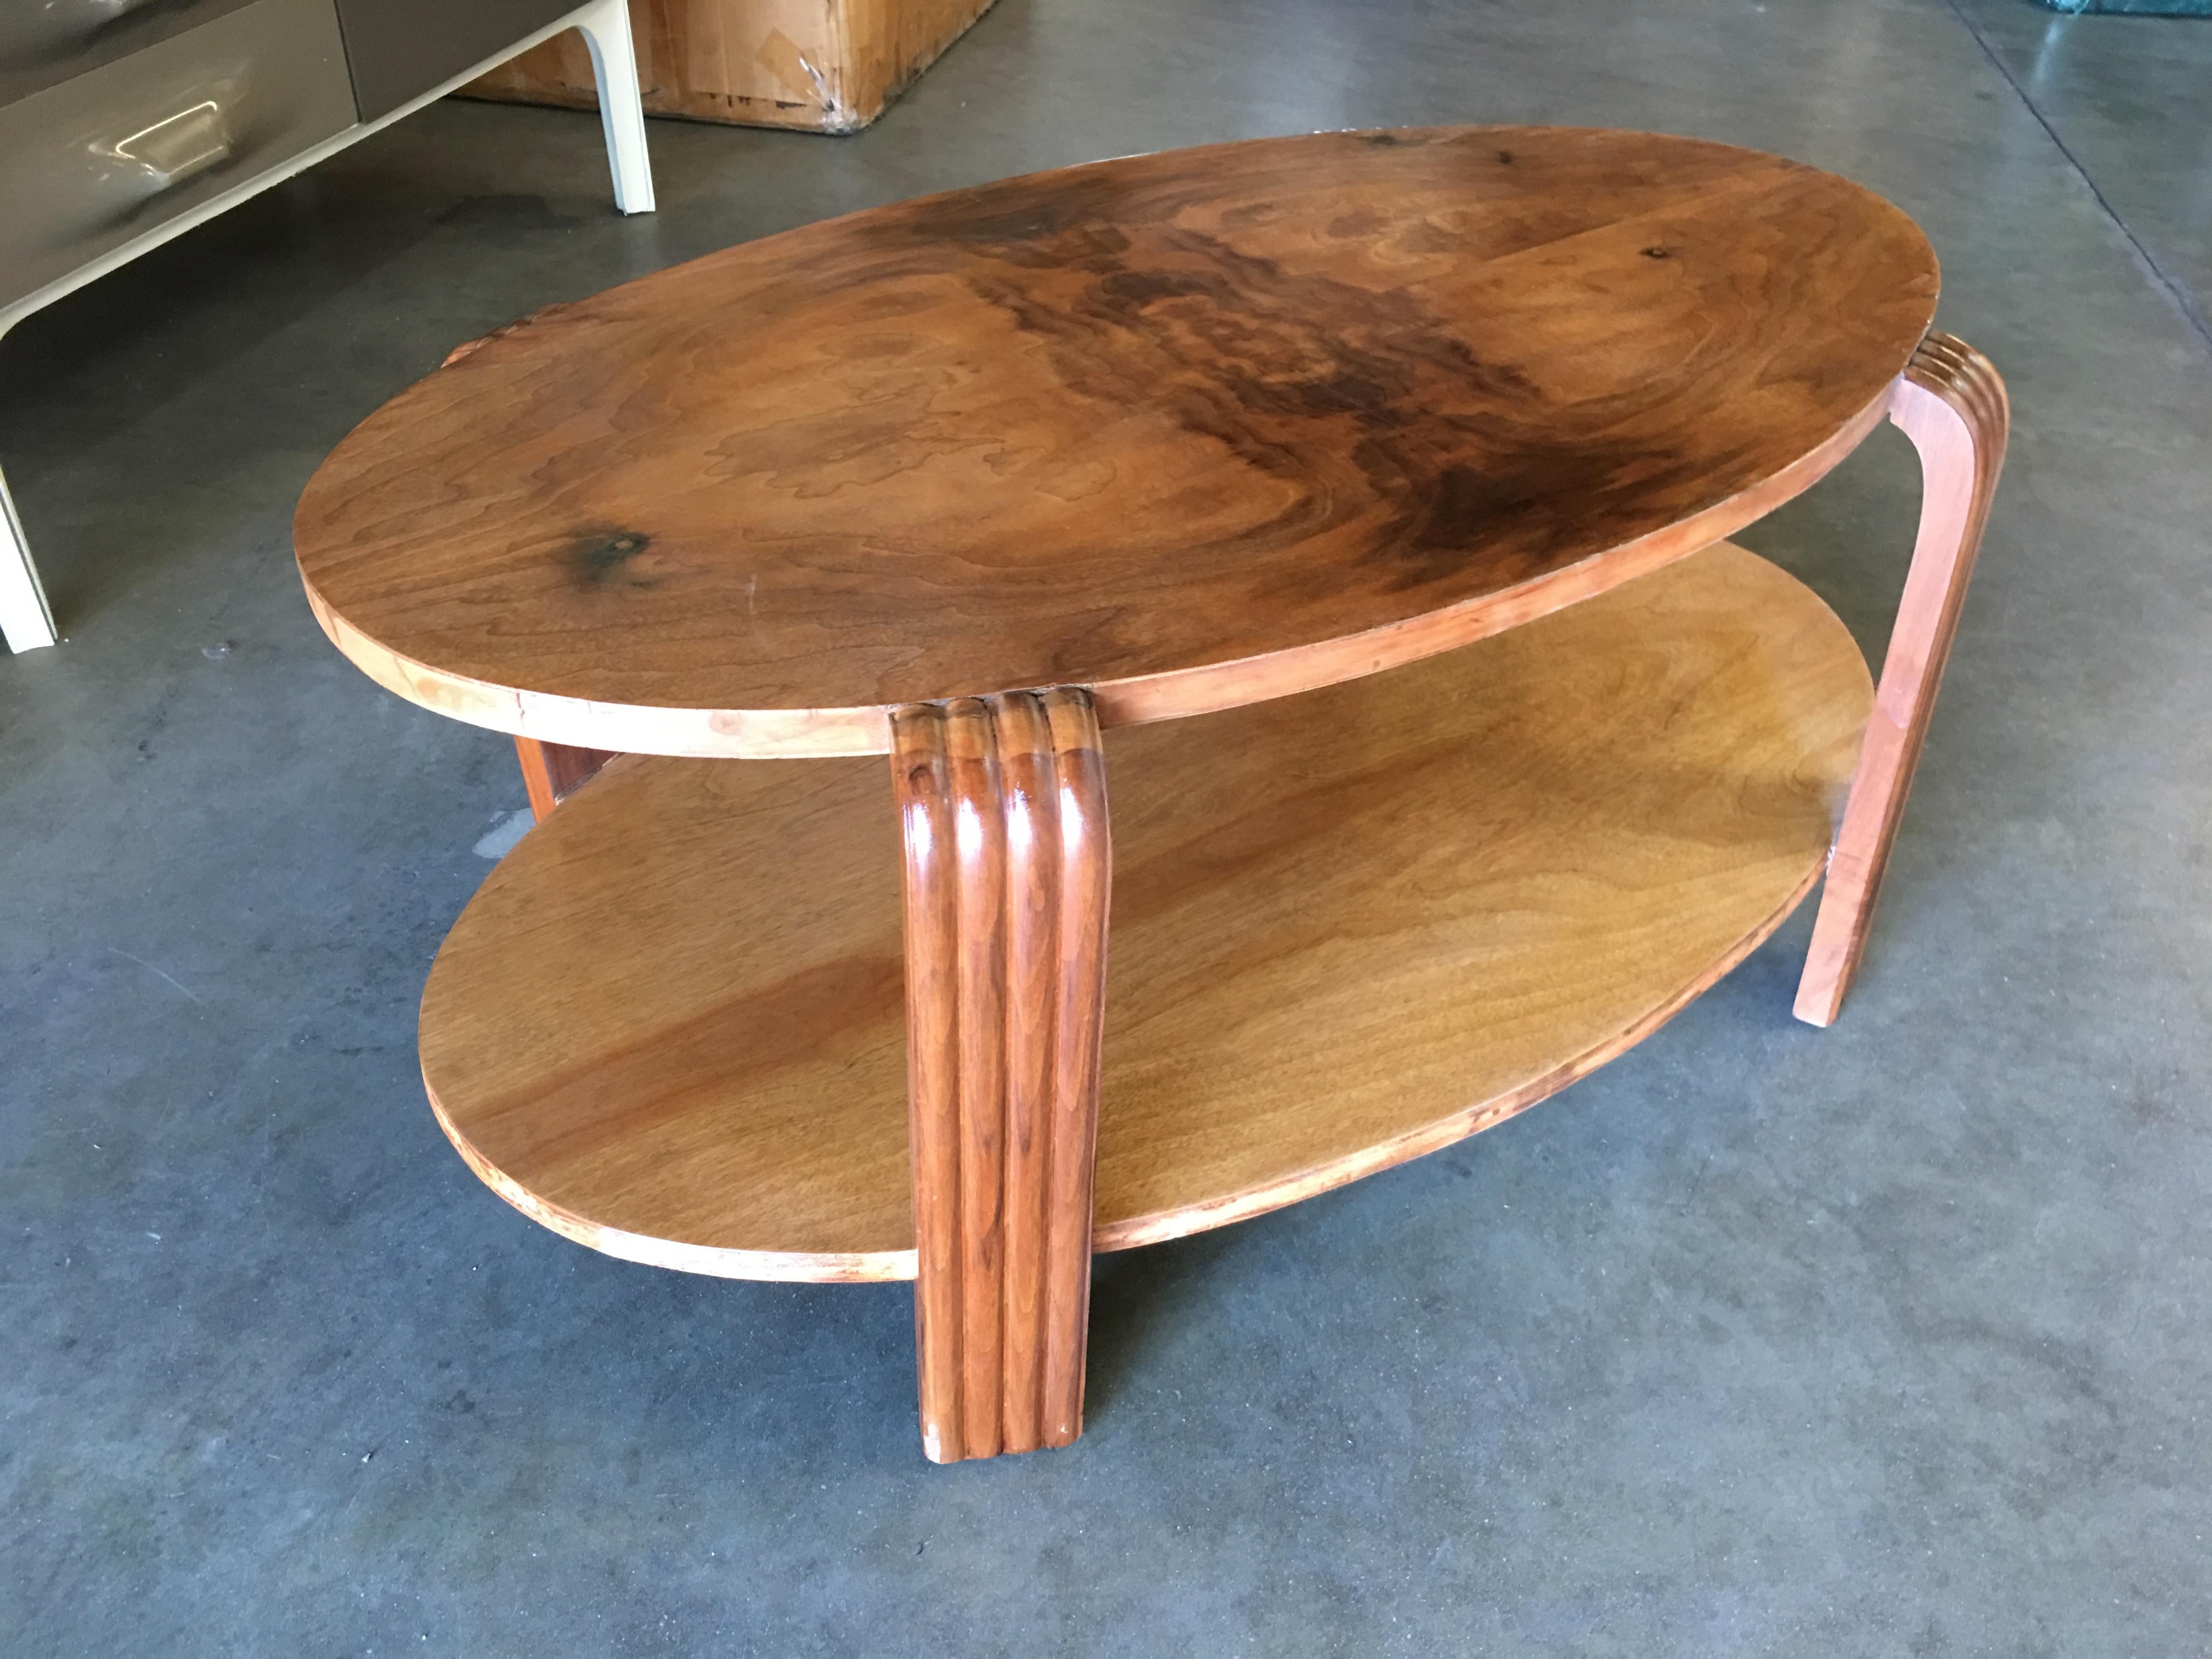 French style Art Deco coffee table with bentwood side arms.